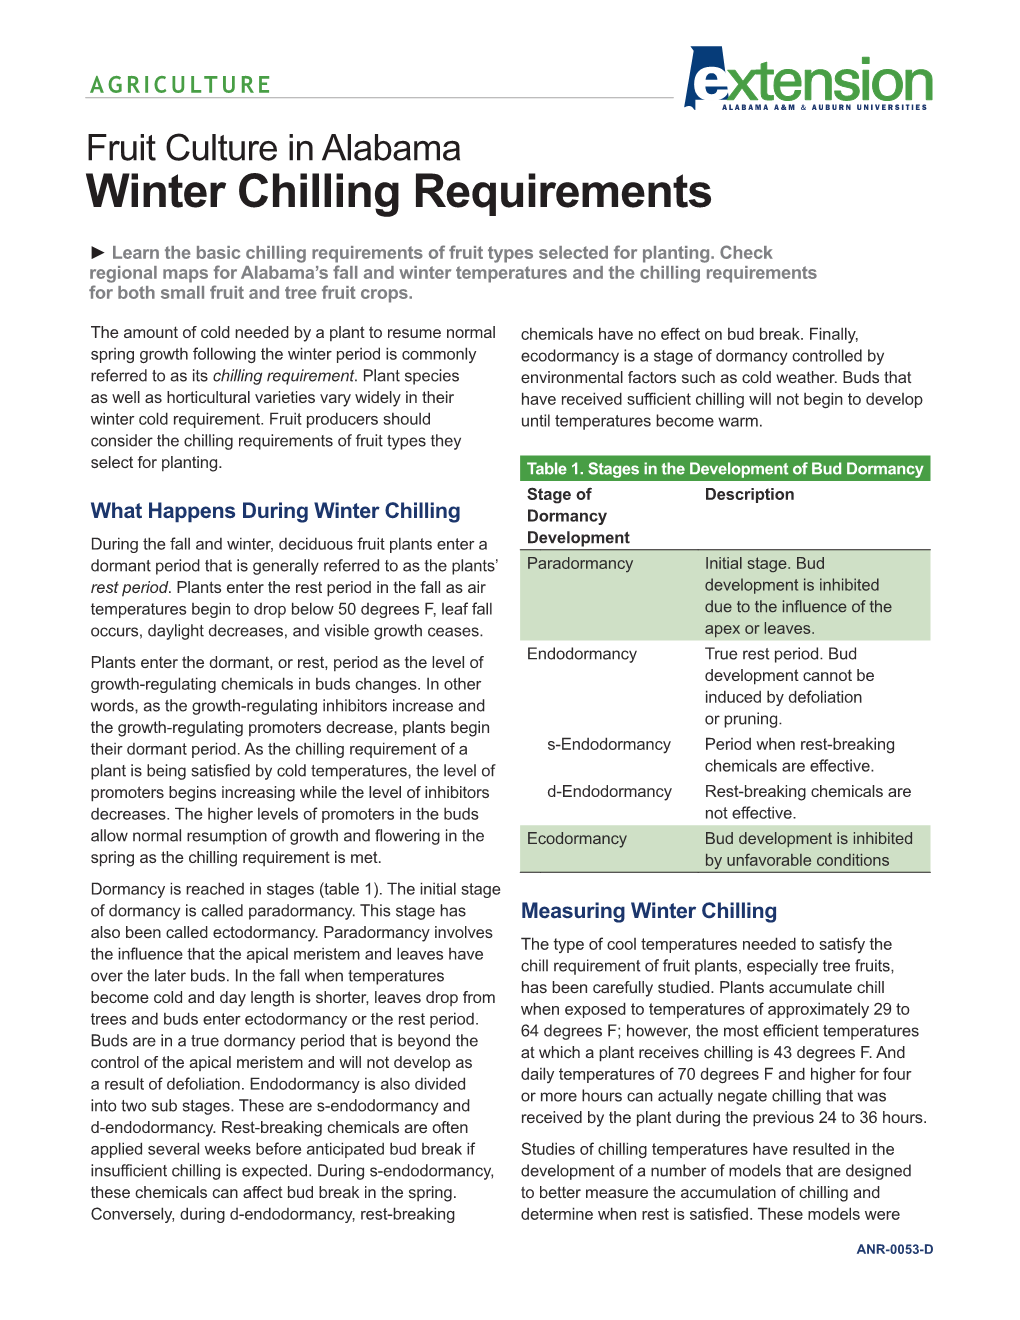 Winter Chilling Requirements